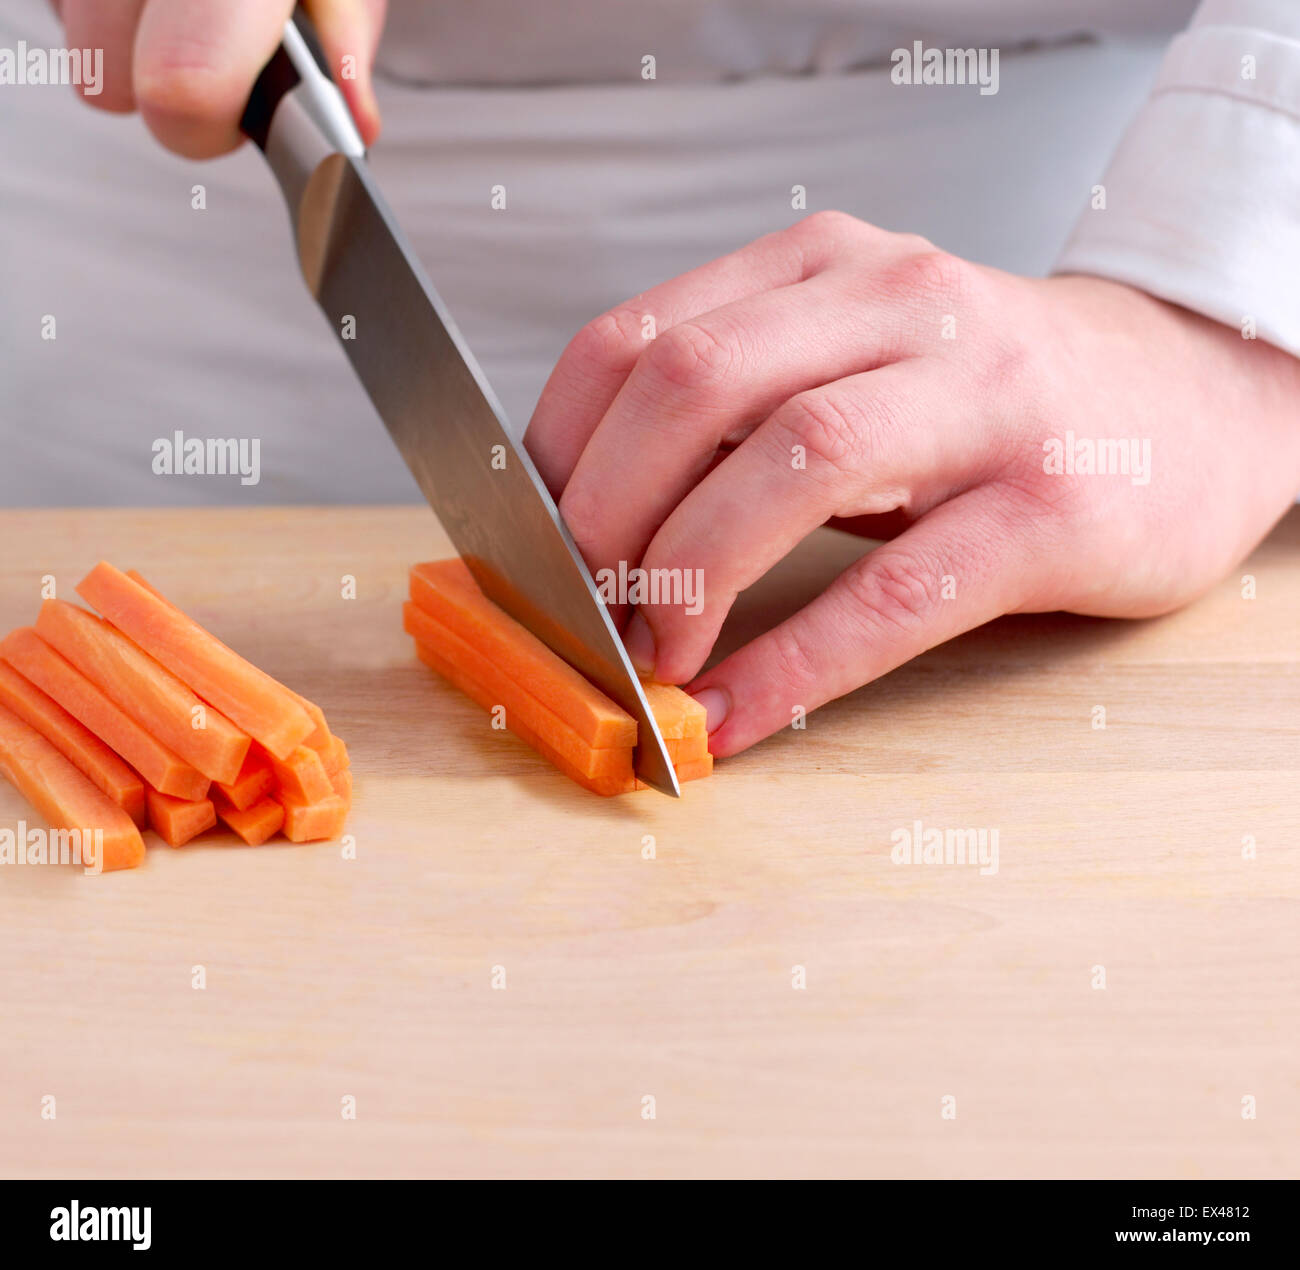 Cutting carrots into strips with large knife, close-up Stock Photo